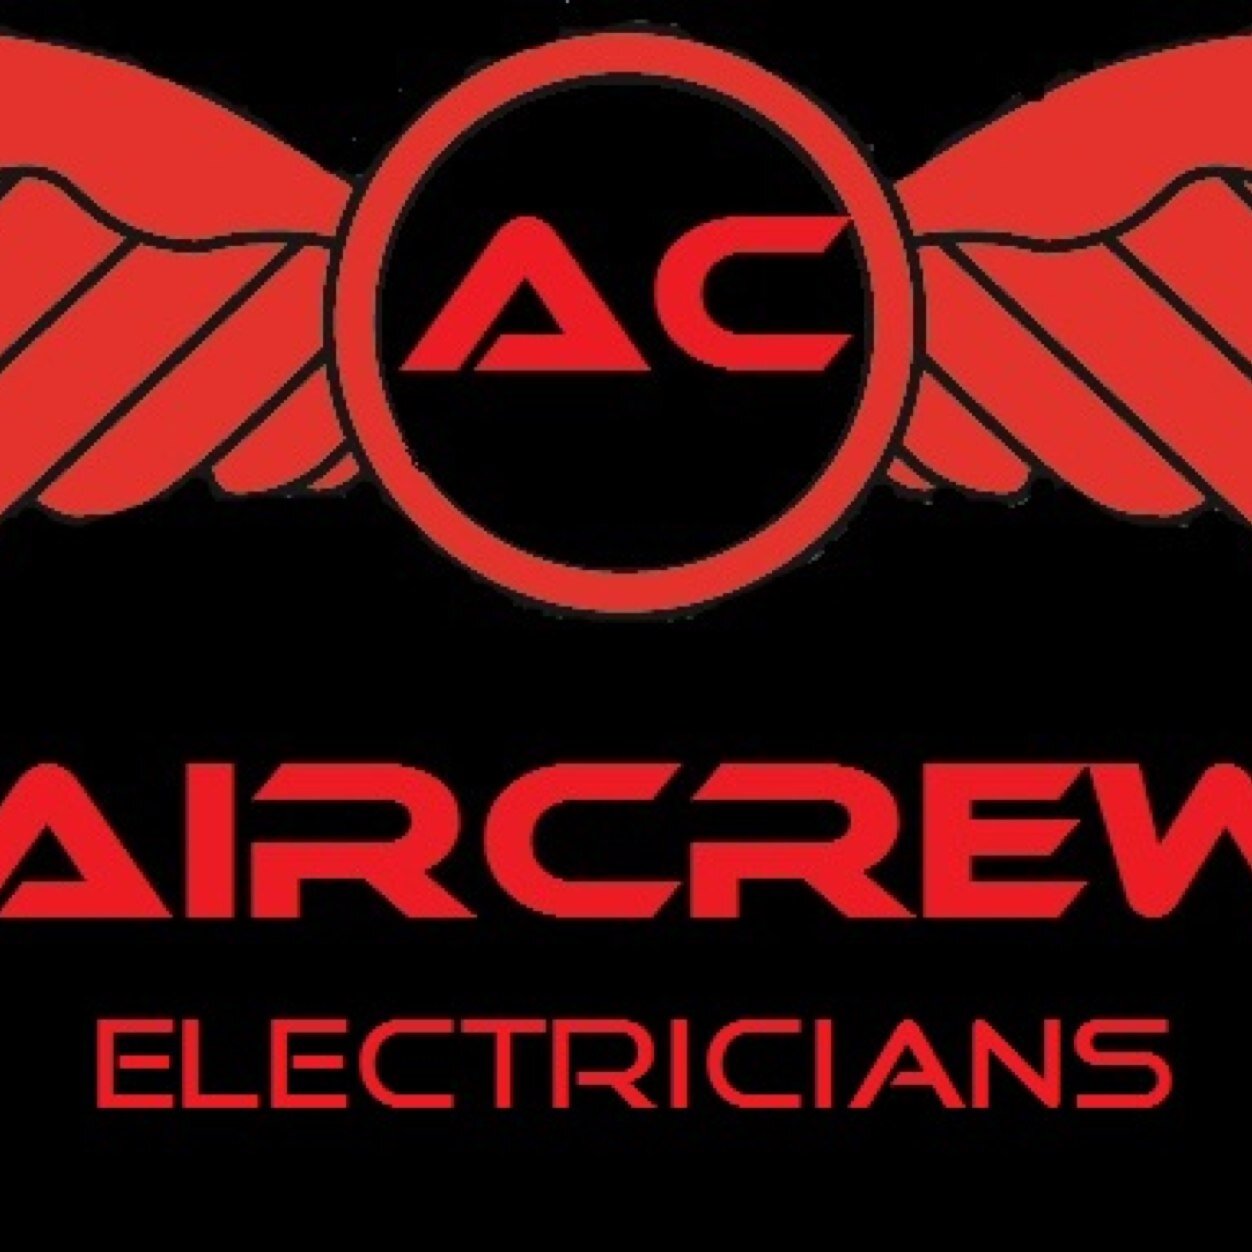 Aircrew is wiltshires highest flying electrical service. Our domestic and commercial electricians have the solution for you.